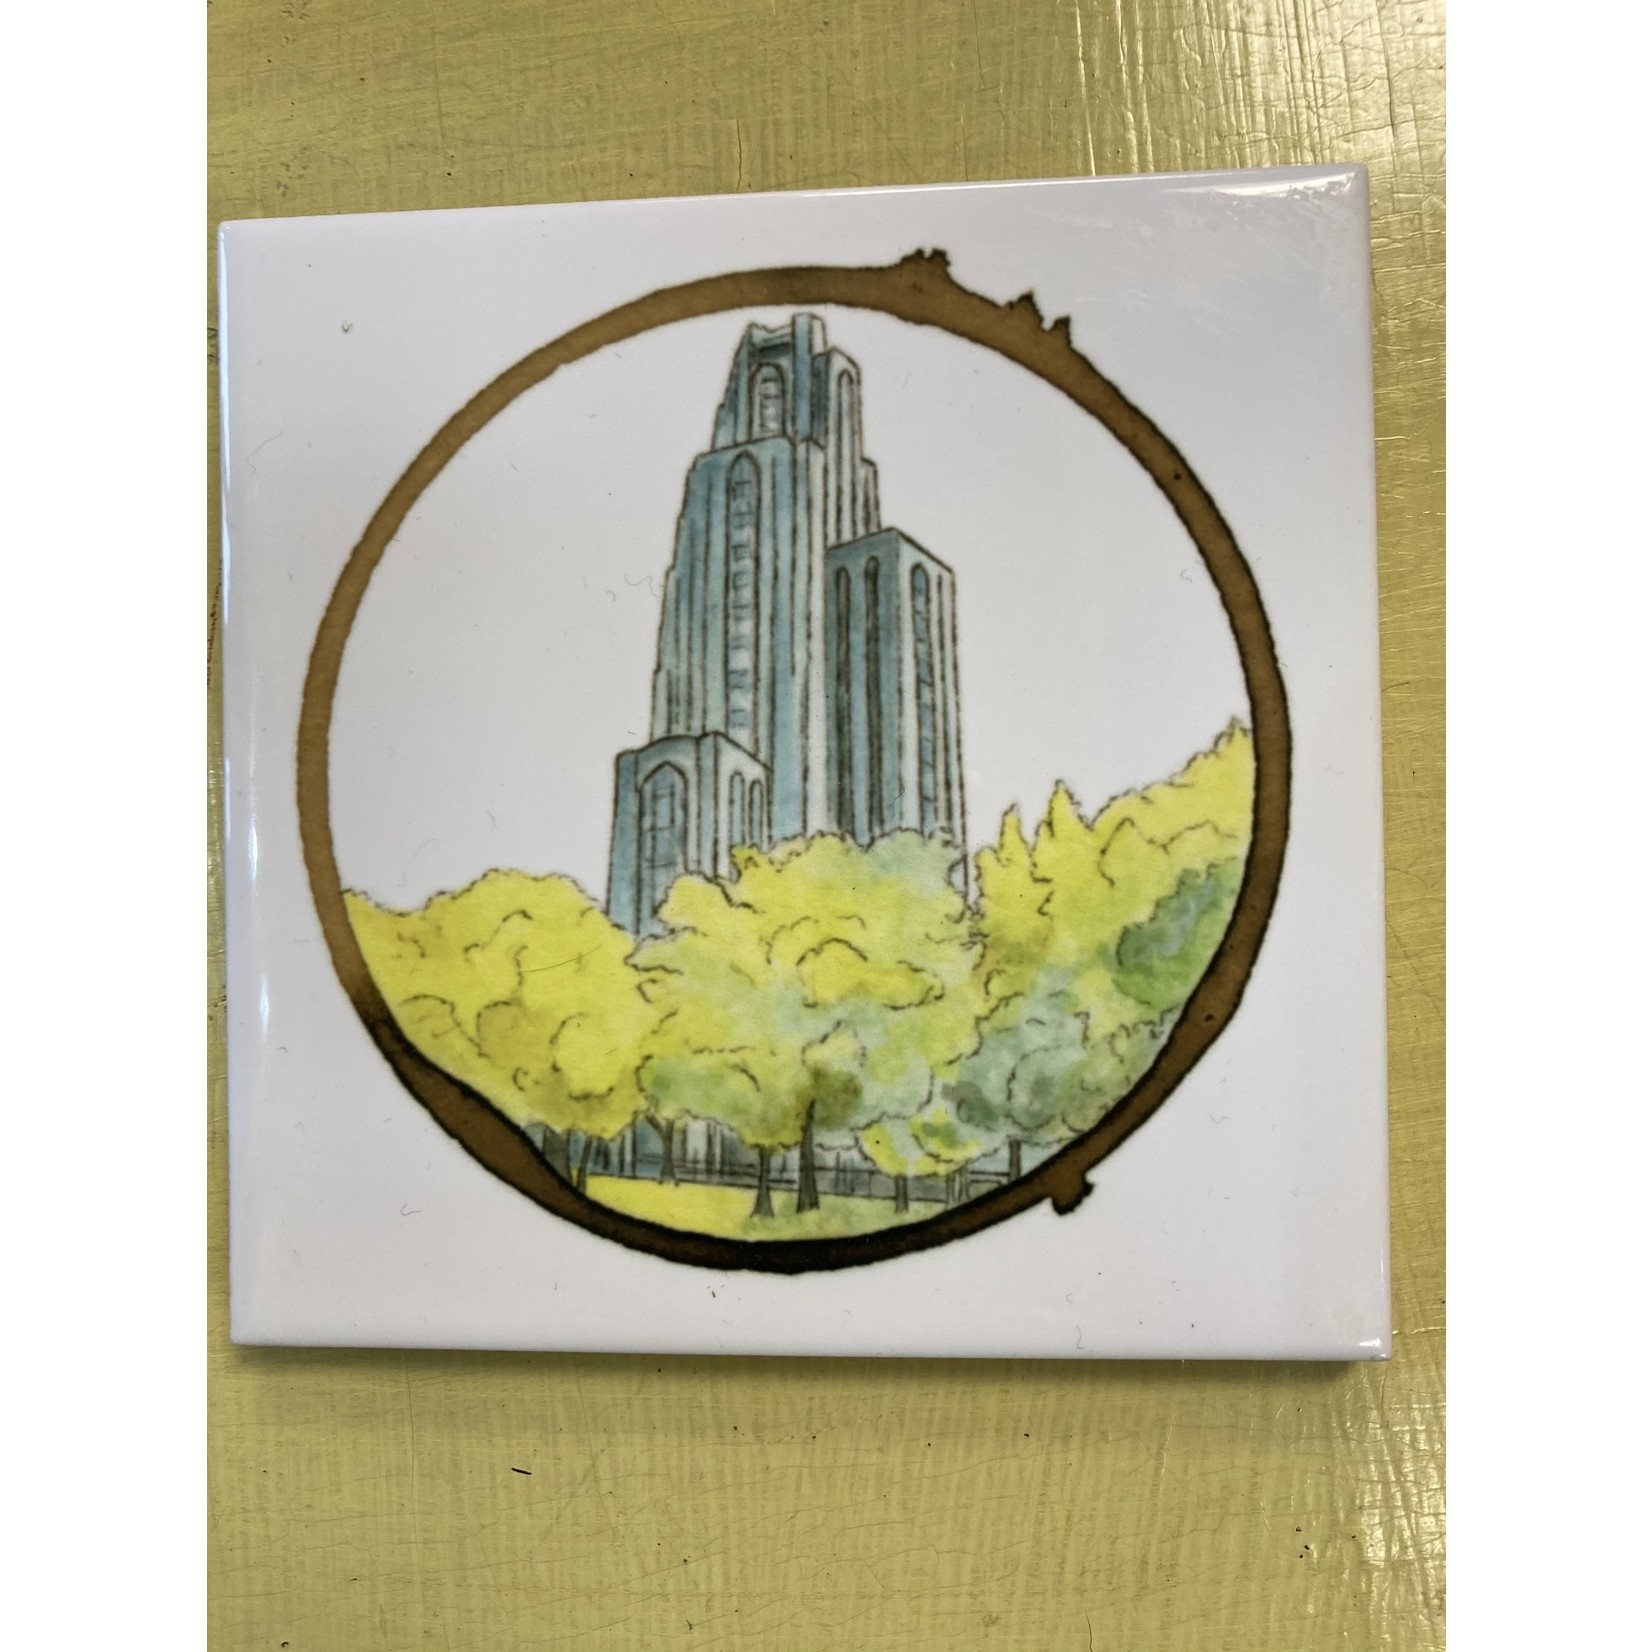 Craig Peterson Craig Peterson | Coffee stain coaster | Cathedral of learning